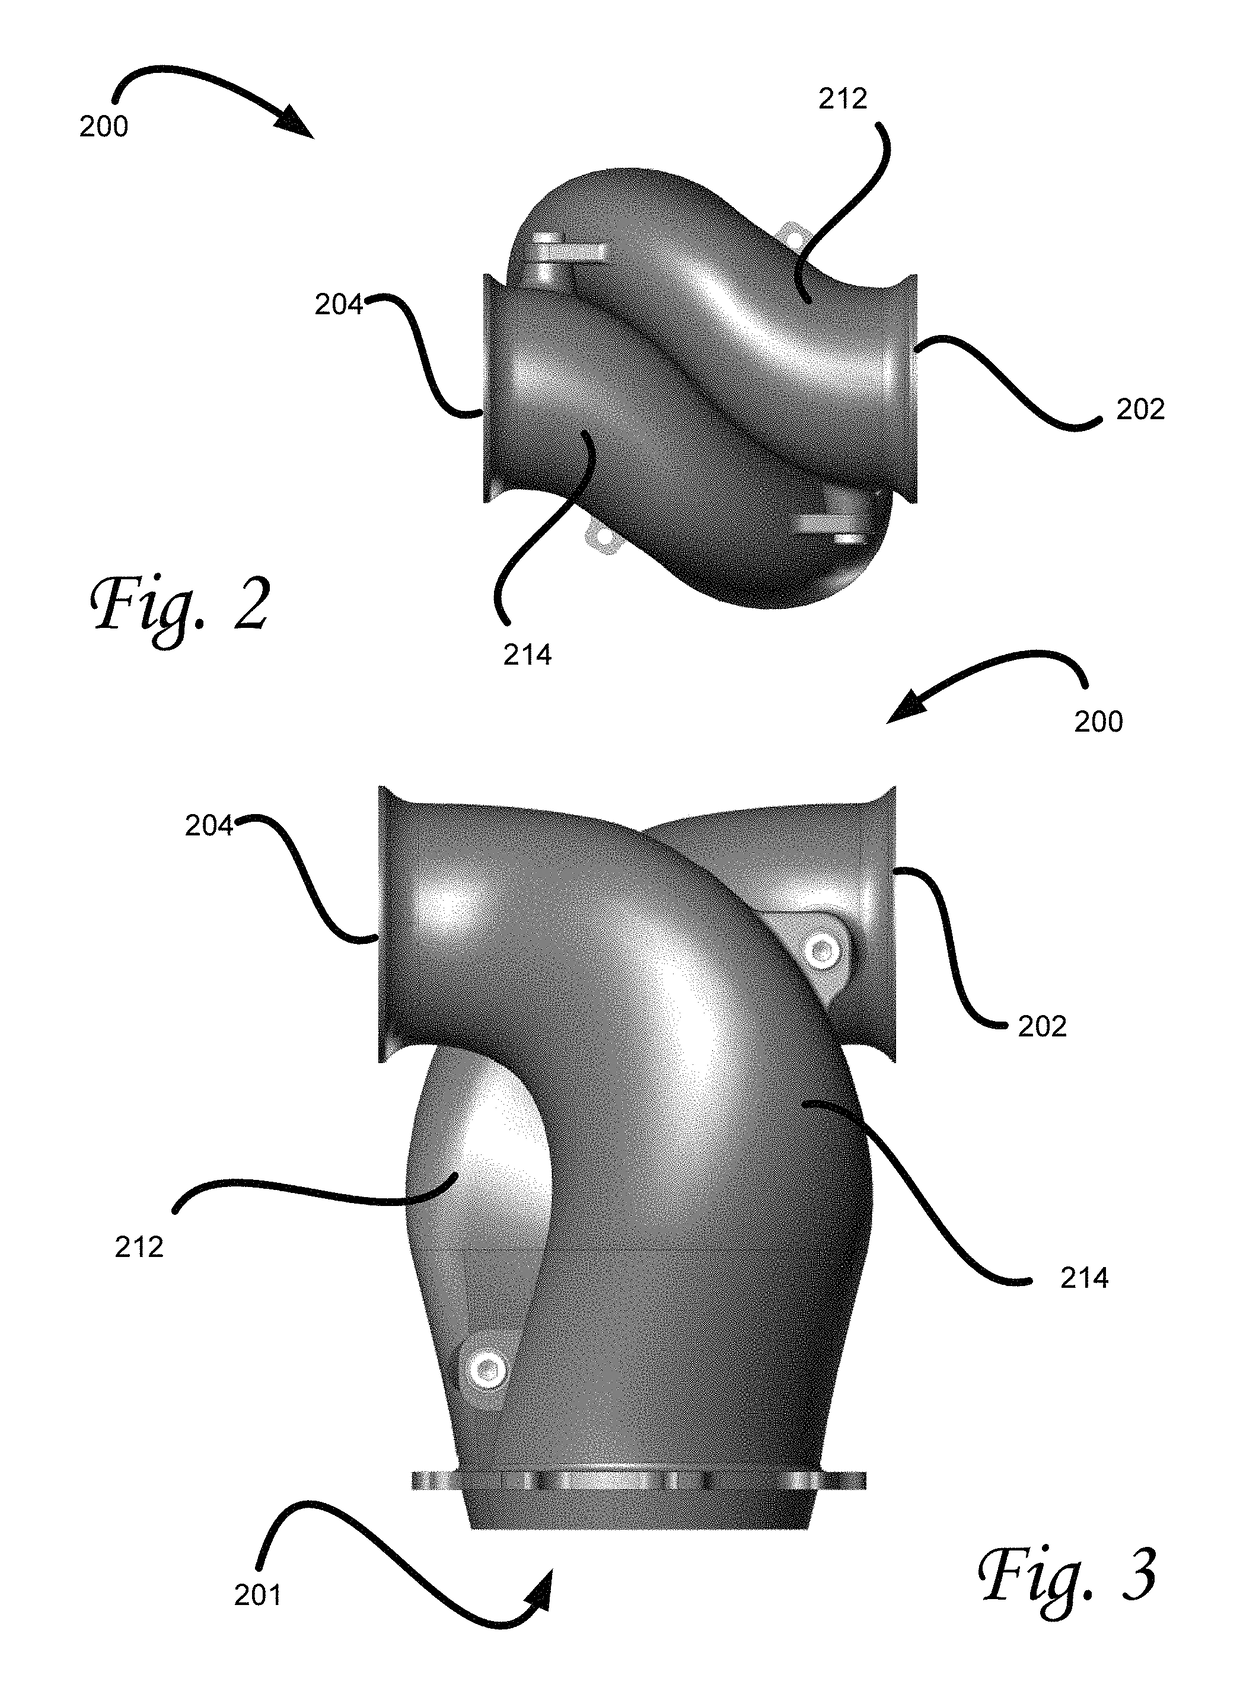 Narrow-outlet splitter for a personal propulsion system